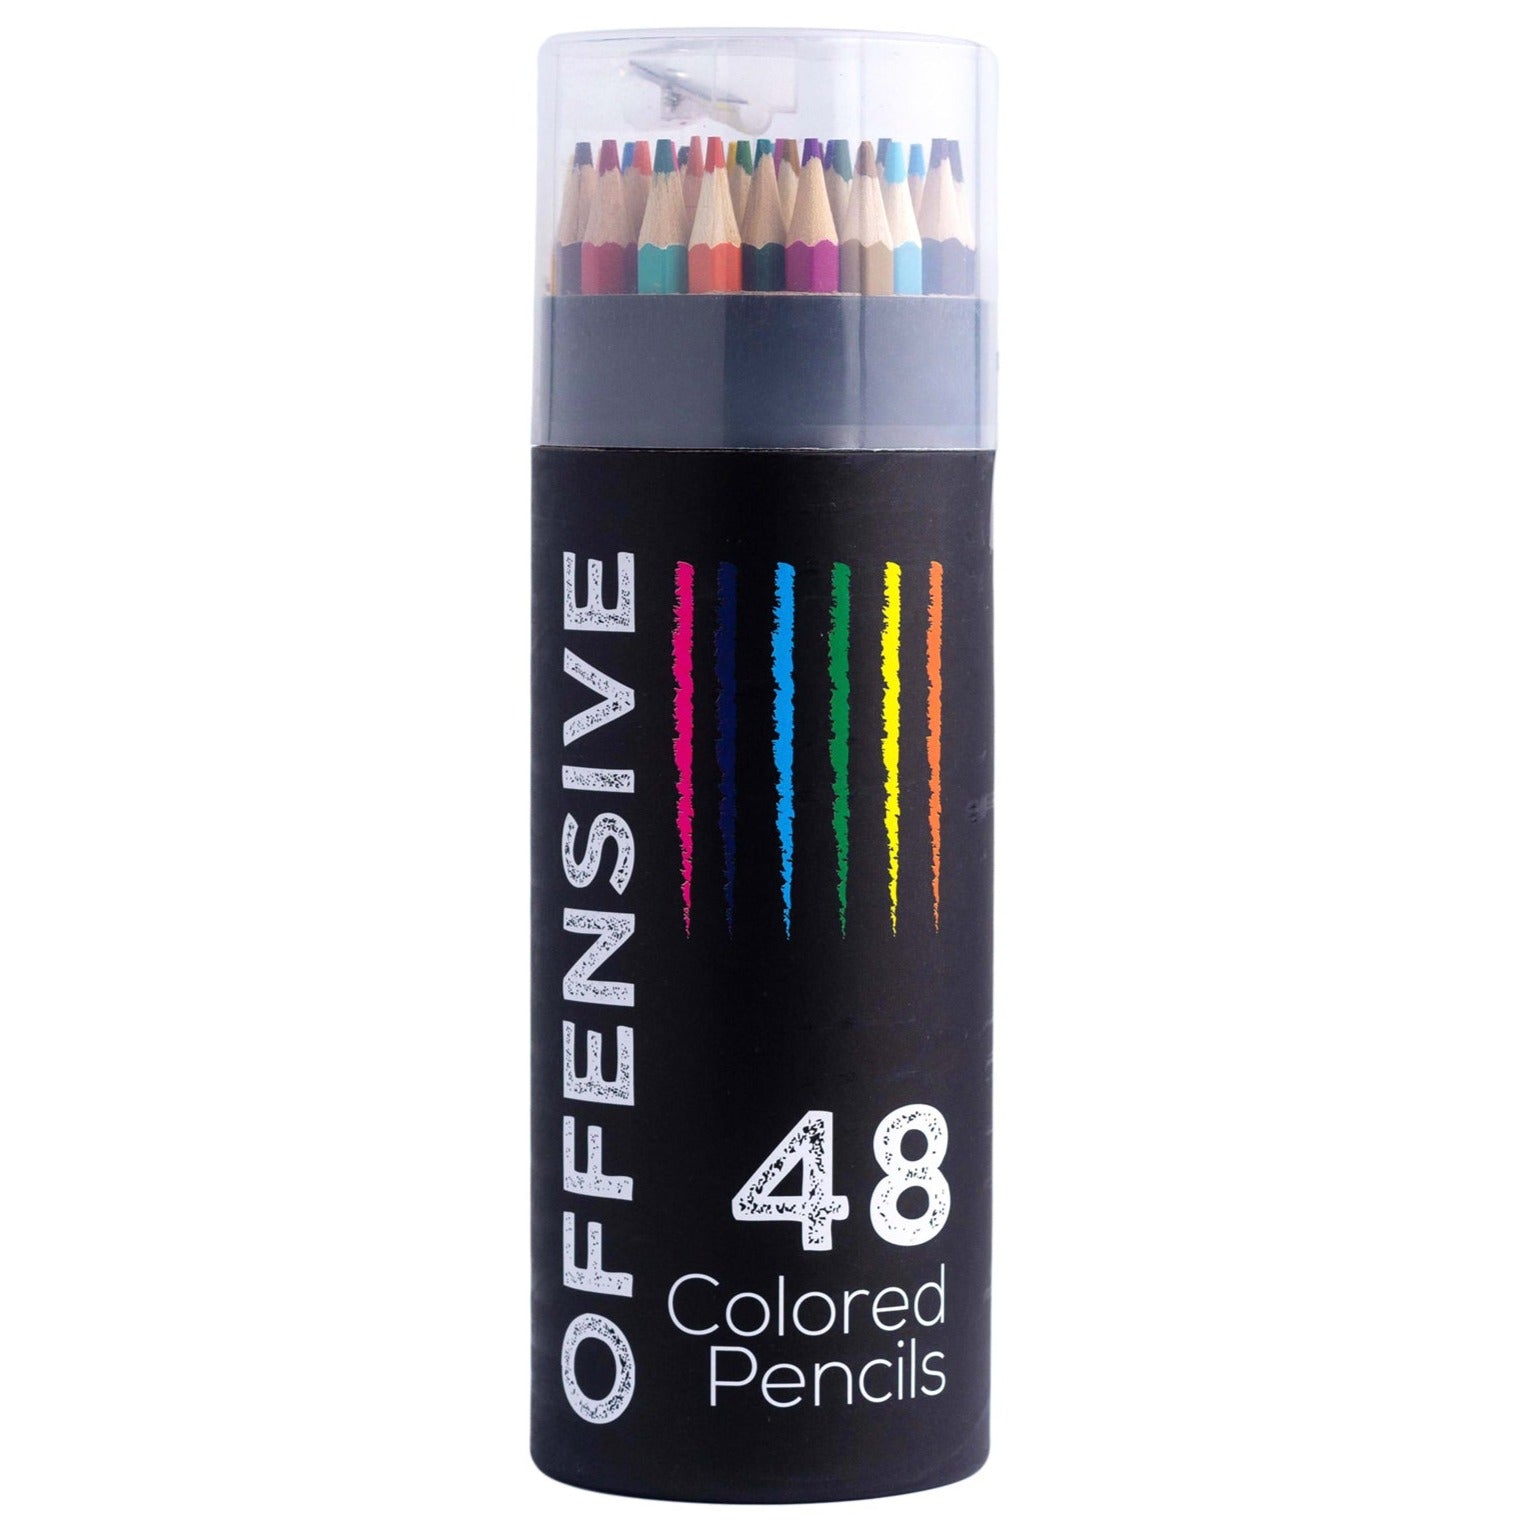 Offensive Colored Pencils, a Funny Gag Gift, Makers of Offensive Crayons,  Adult Coloring, Relaxing, Art Therapy, Back to School, Teacher 